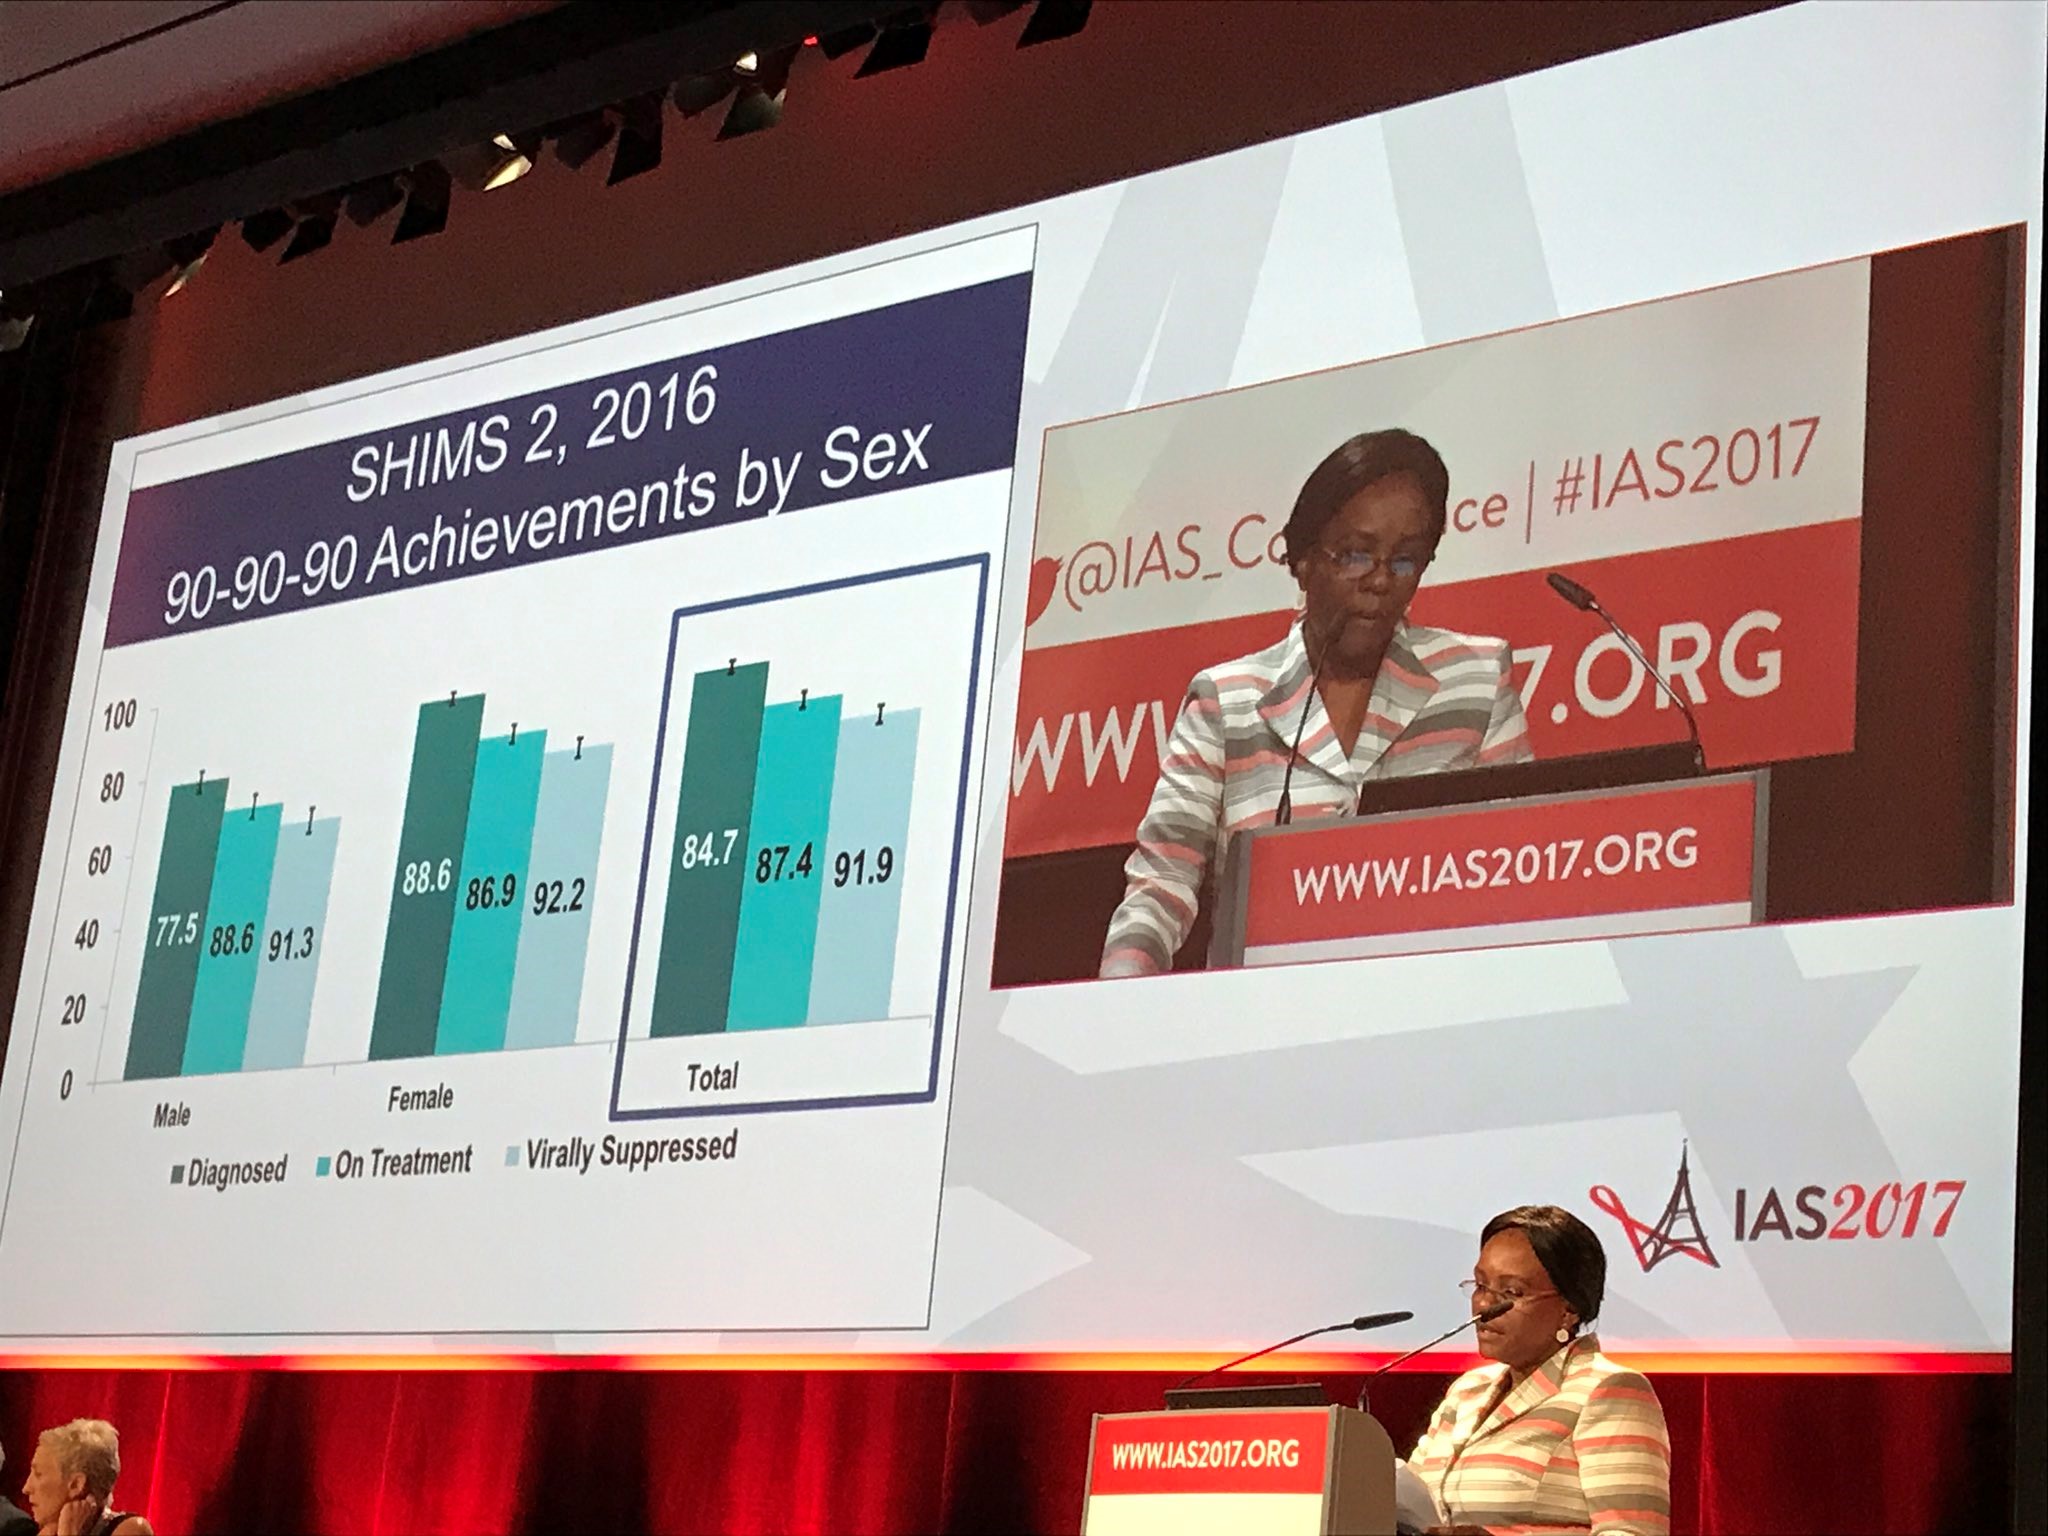 Major Progress in Confronting HIV in Swaziland Announced at IAS 2017